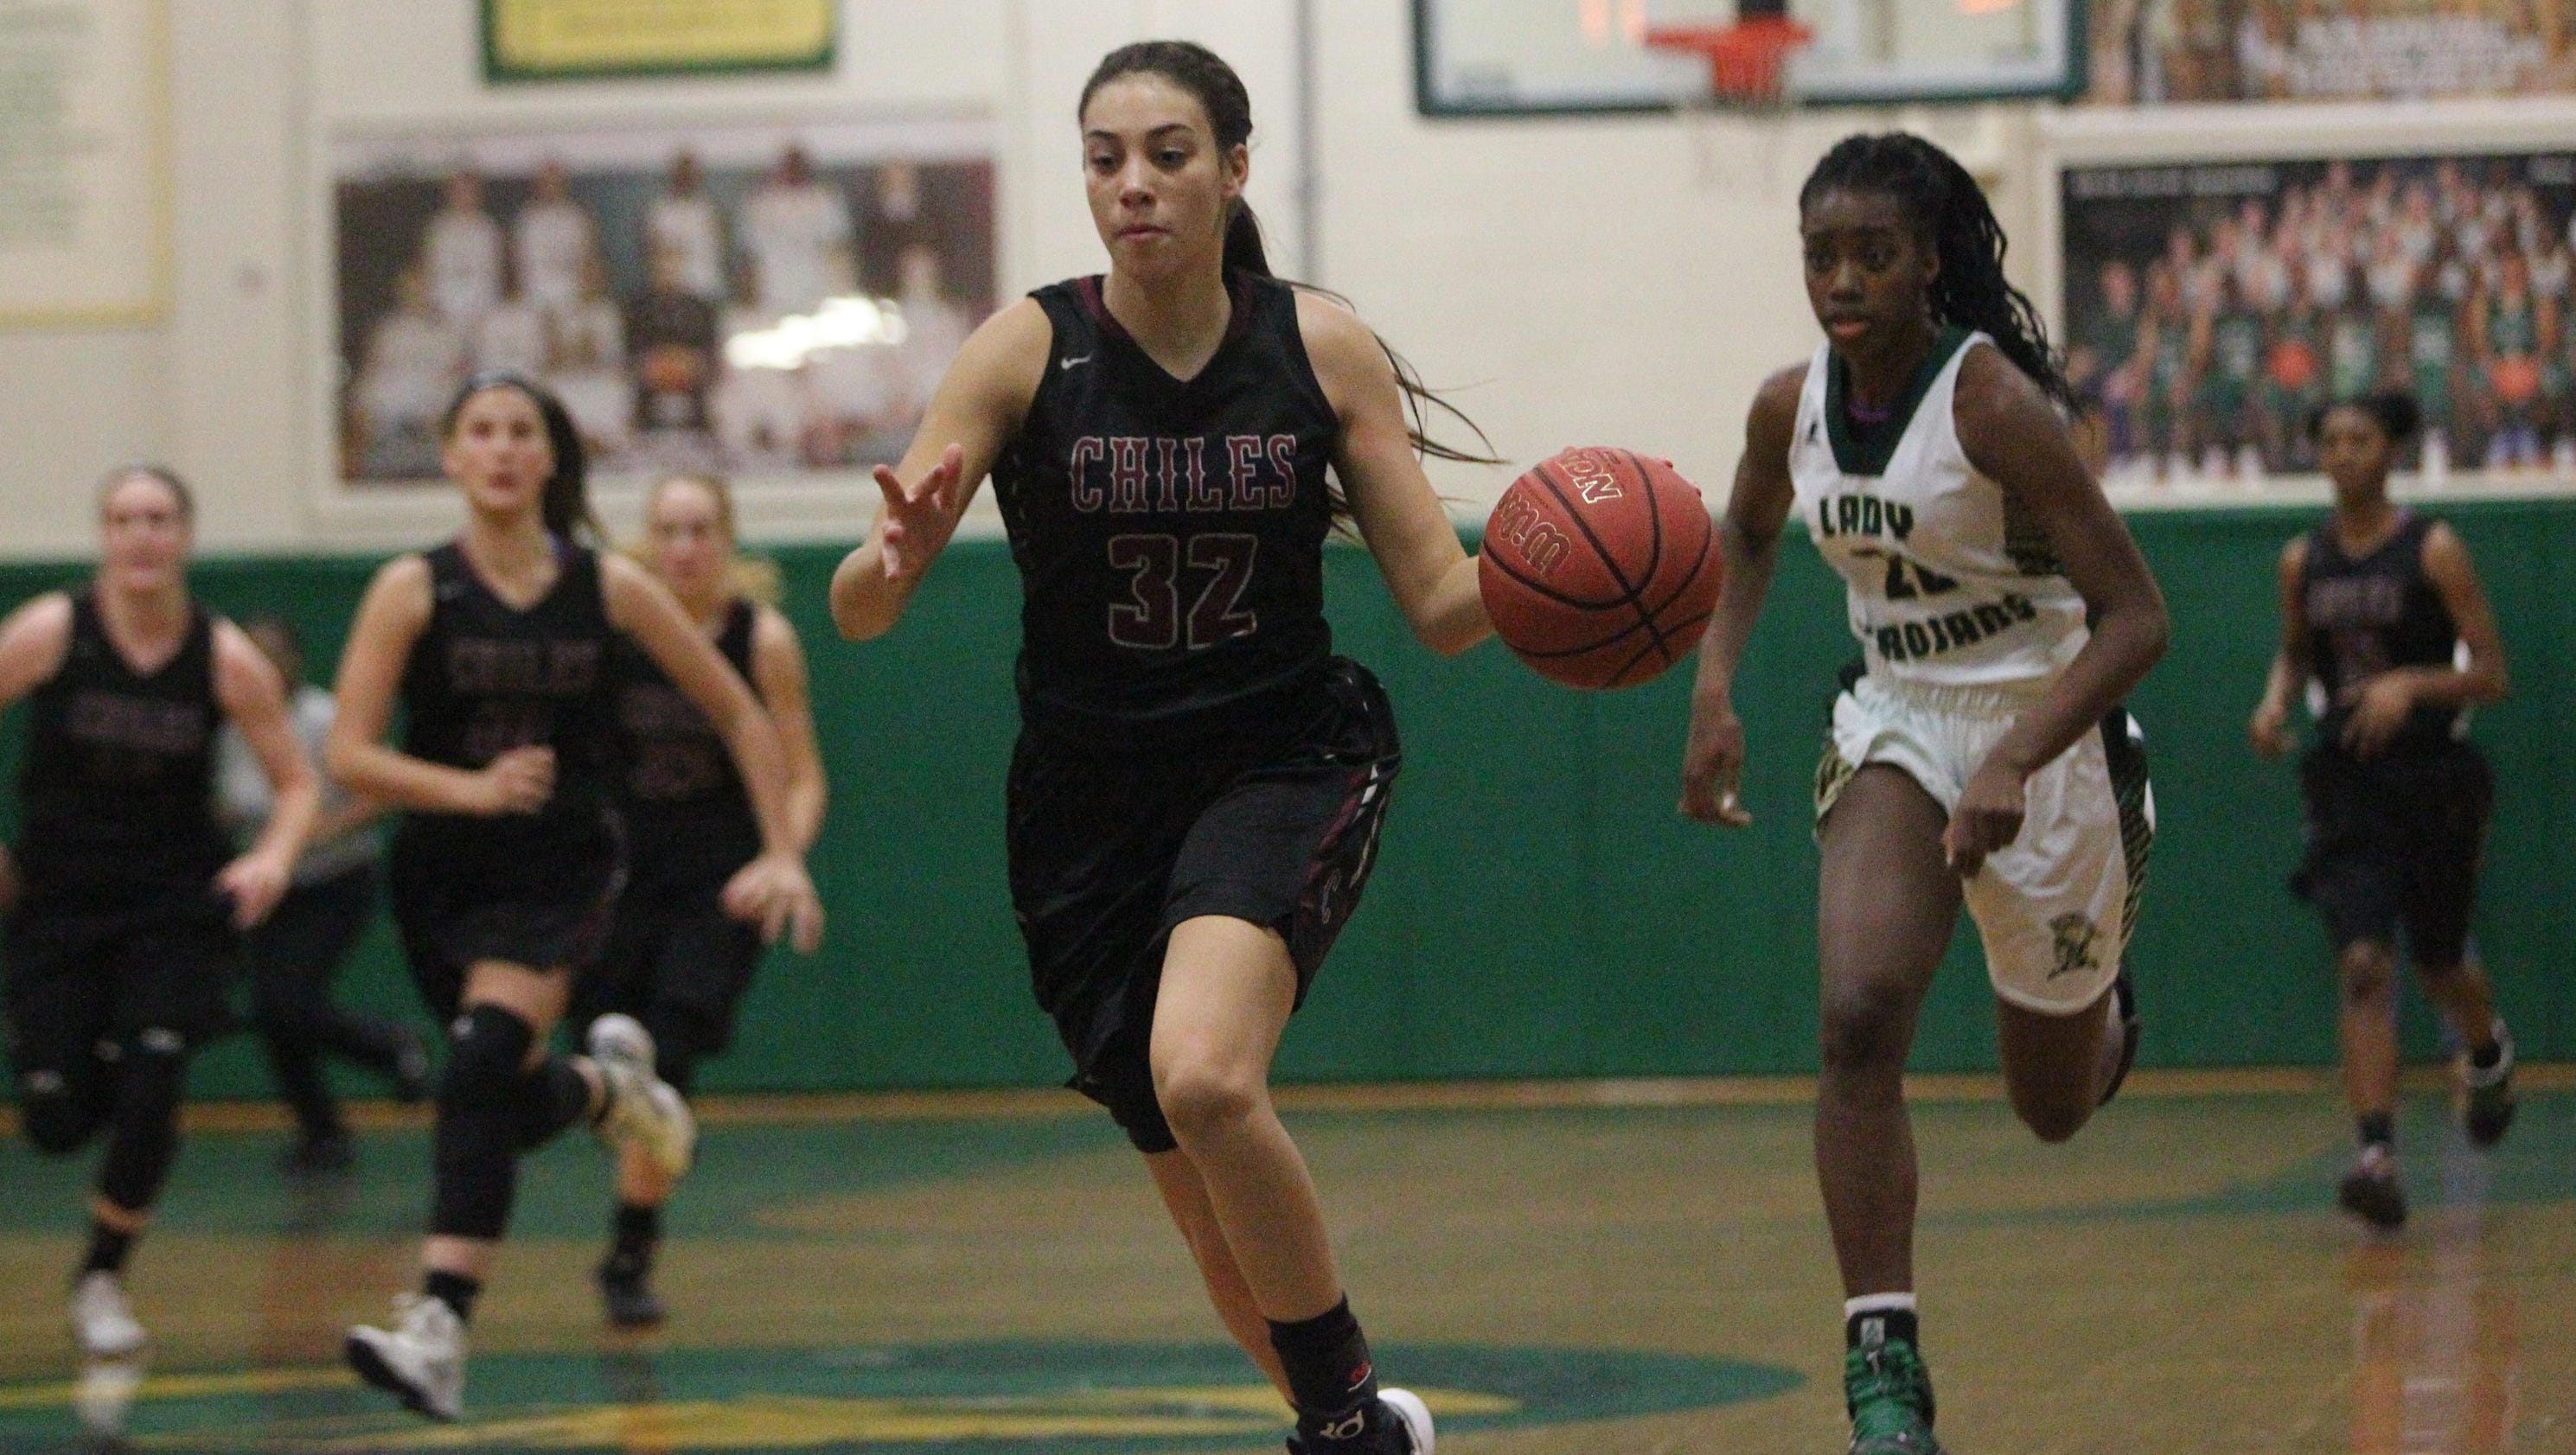 Playoffs, respectability on the brain of Chiles' girls basketball team - Tallahassee.com